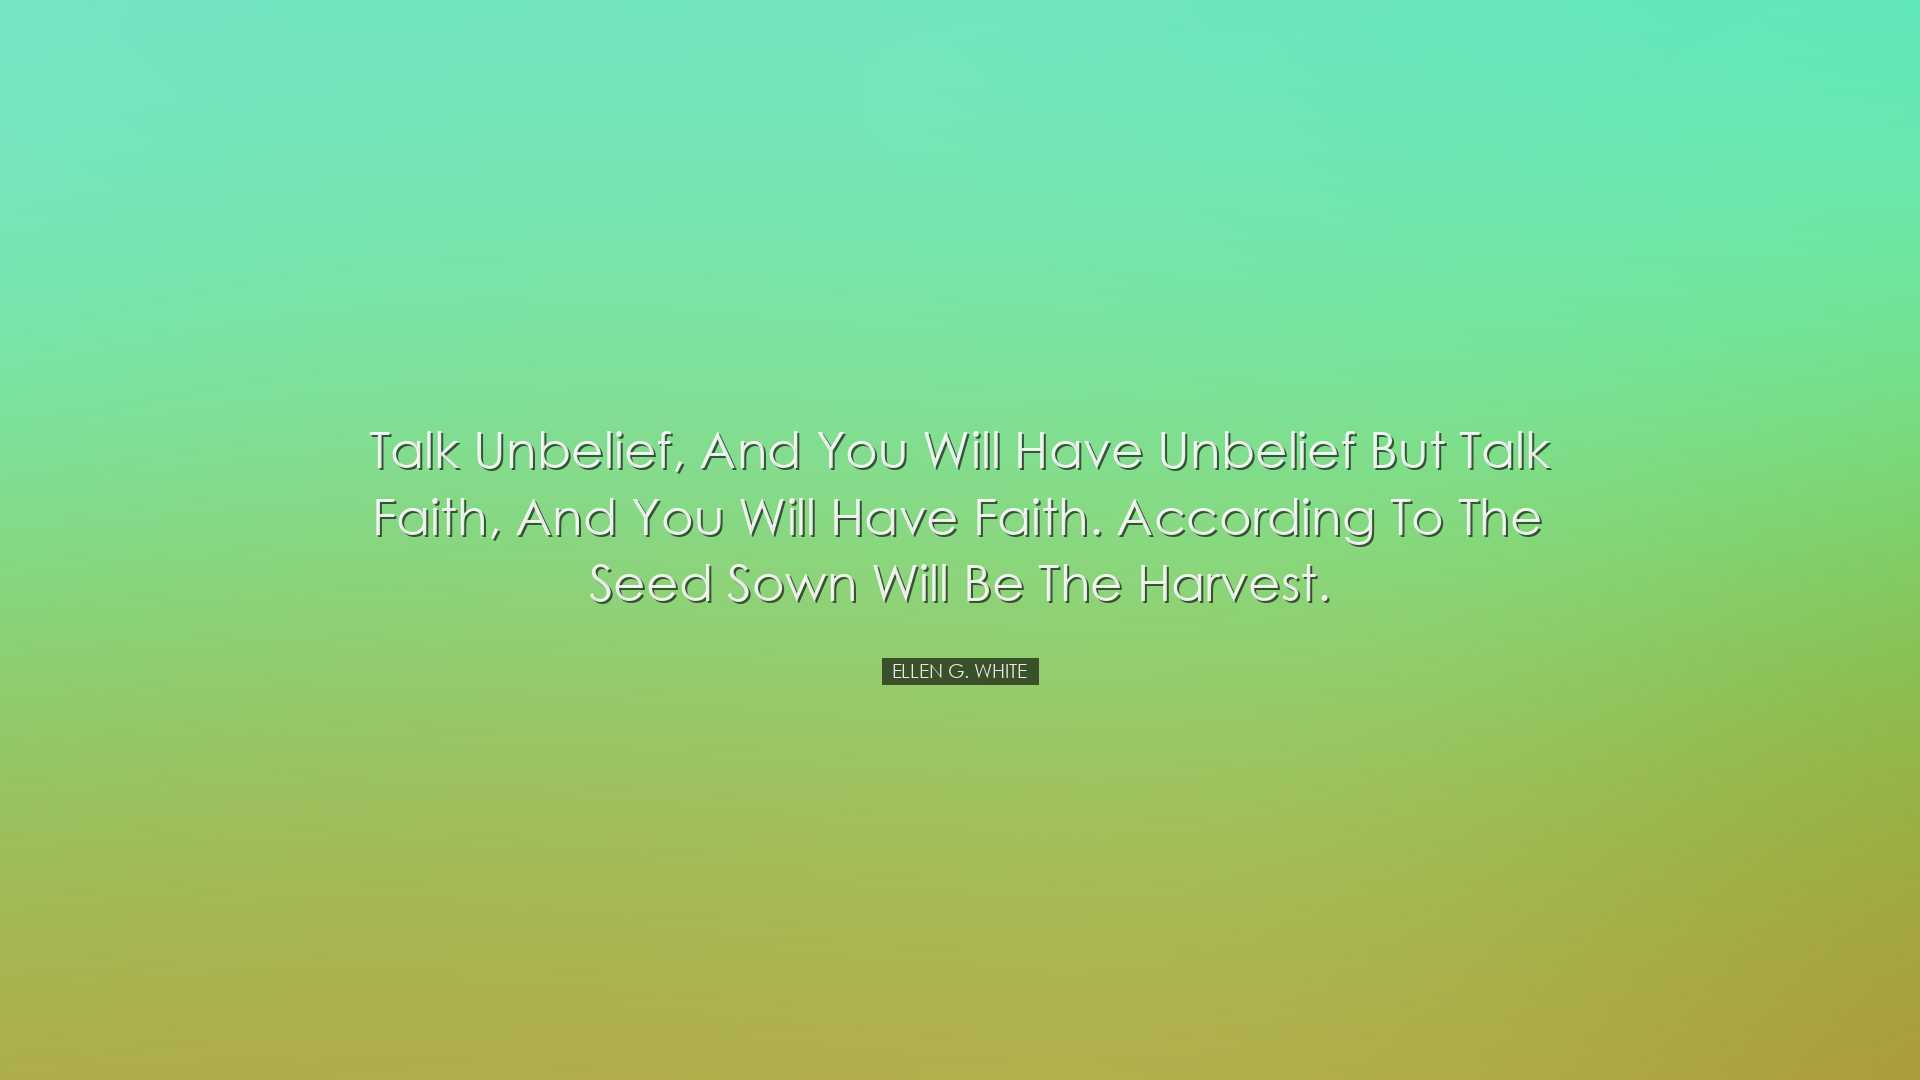 Talk unbelief, and you will have unbelief but talk faith, and you